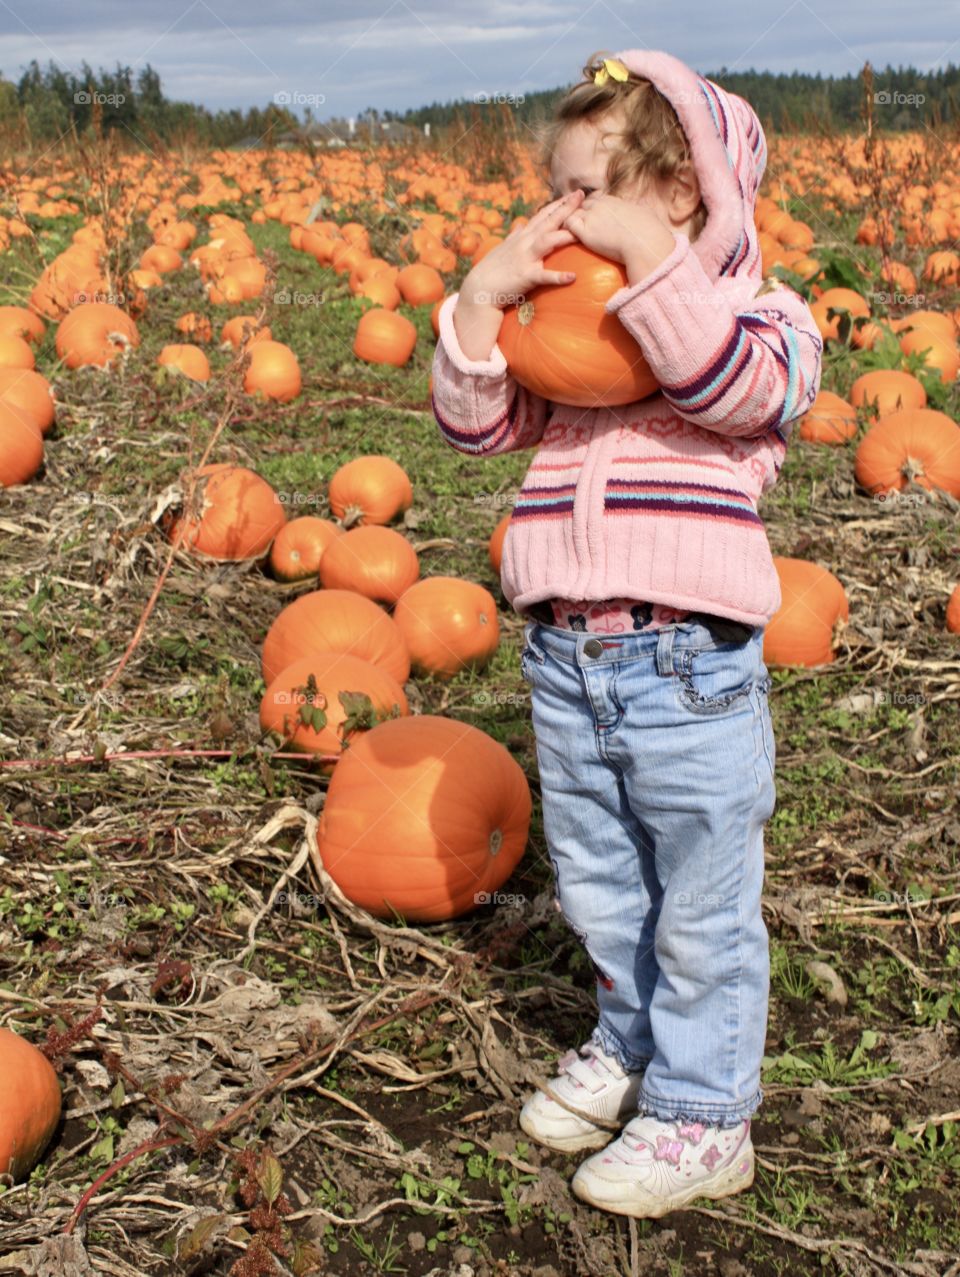 Hunting for the perfect pumpkin in the patch 